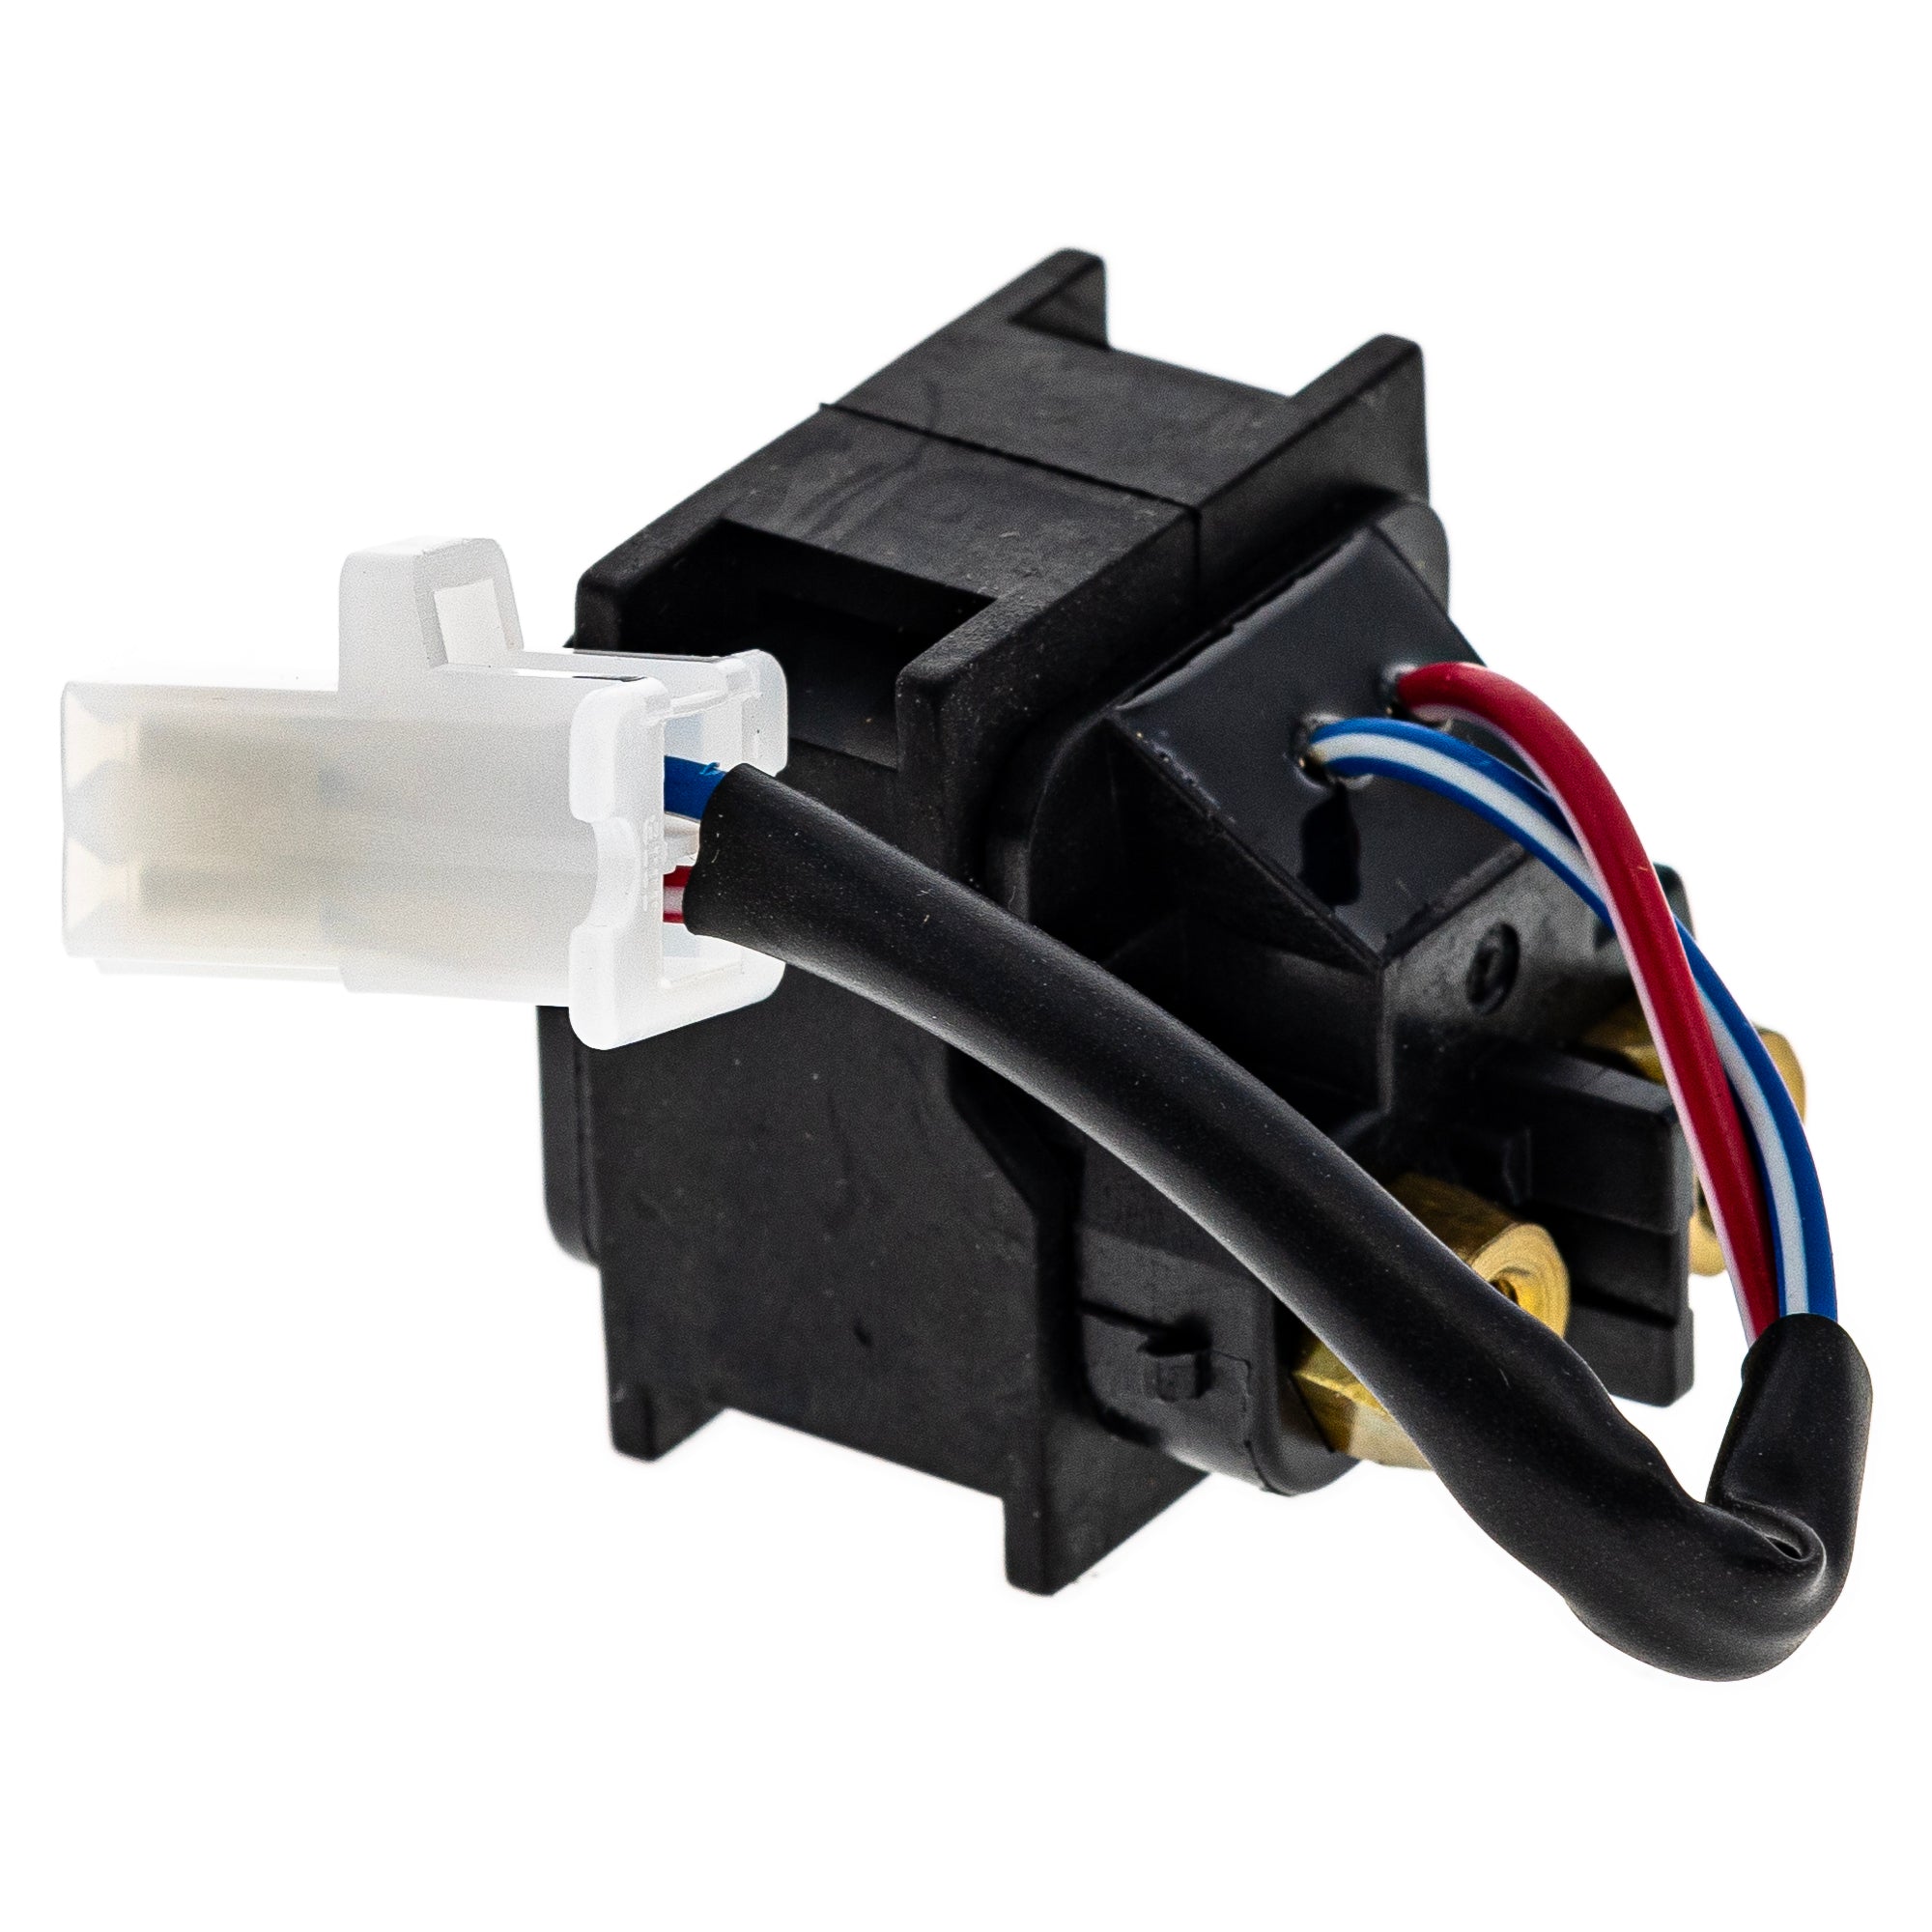 Starter Solenoid Relay Switch for zOTHER DRZ400SM DRZ400S DRZ400E DRZ400 NICHE 519-CSS2295L